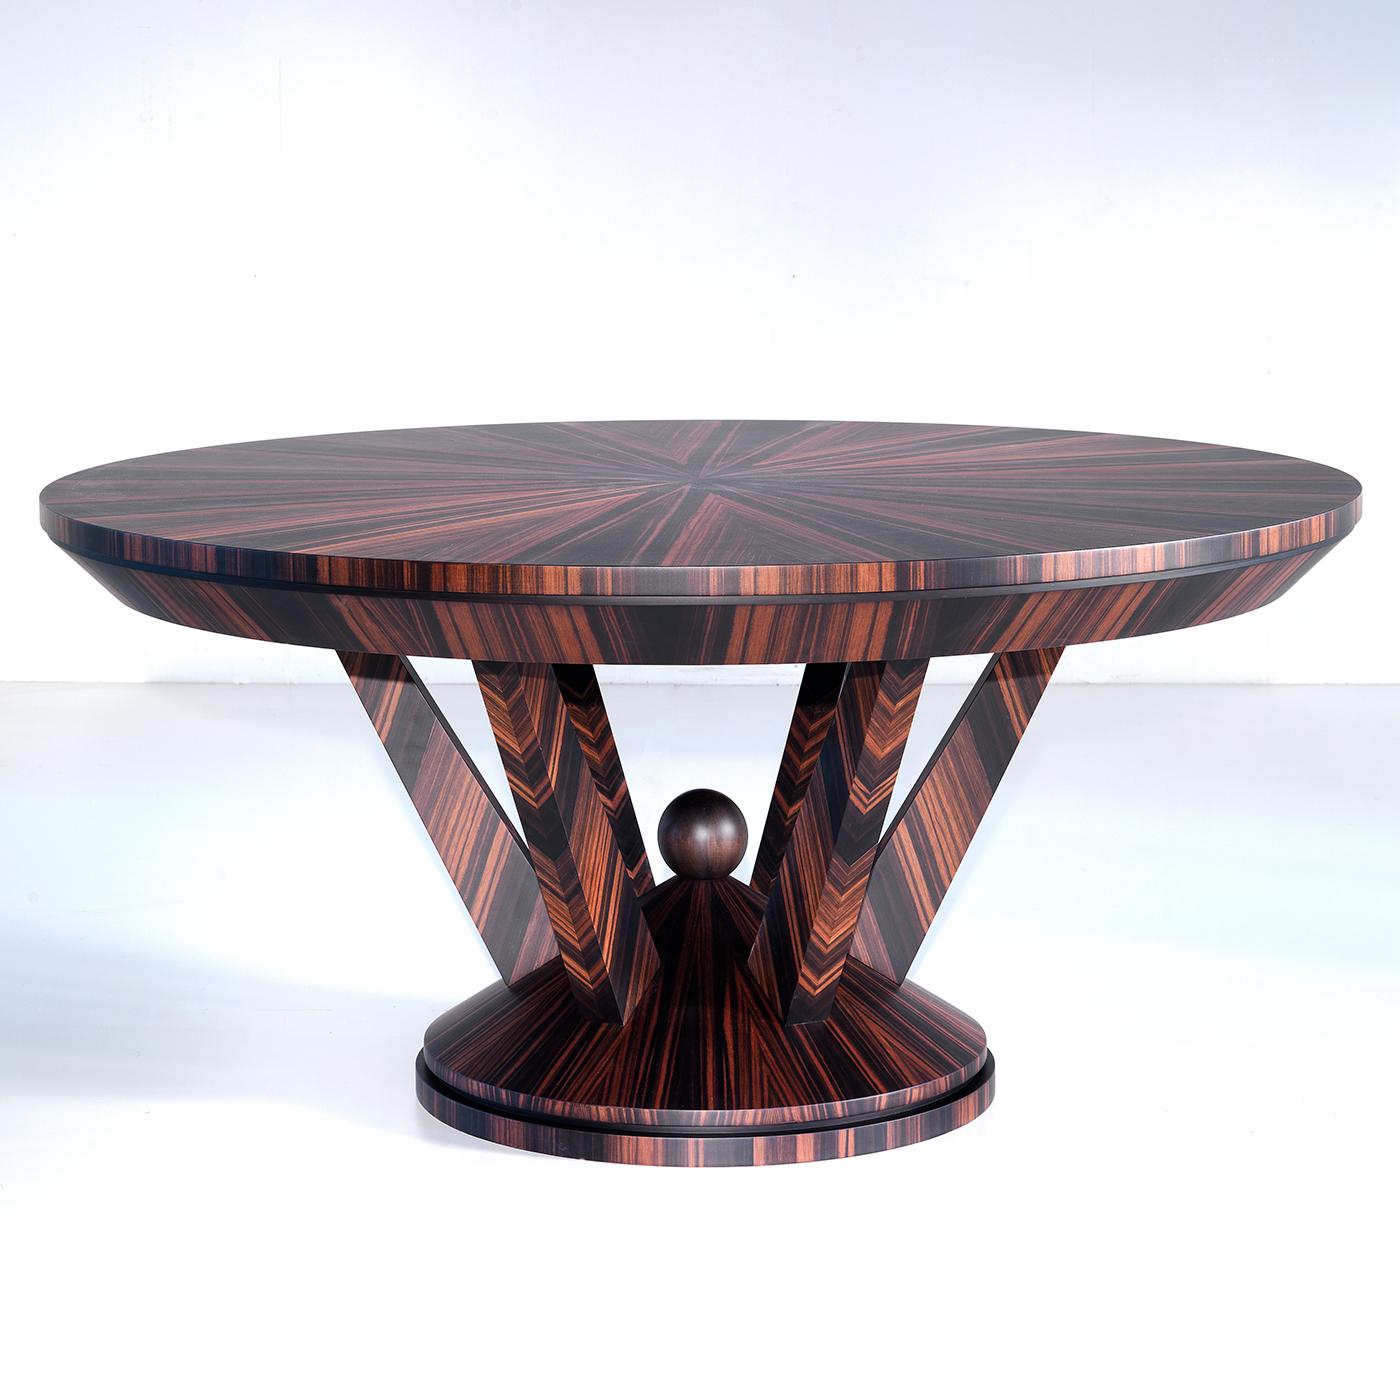 The eye-catching, geometric patterns identifying the natural beauty of Makassar ebony is the hallmark of this imposing round dining table. Four bold, slanted elements rise from a conical base enlivened by a spherical finial to efficiently sustain